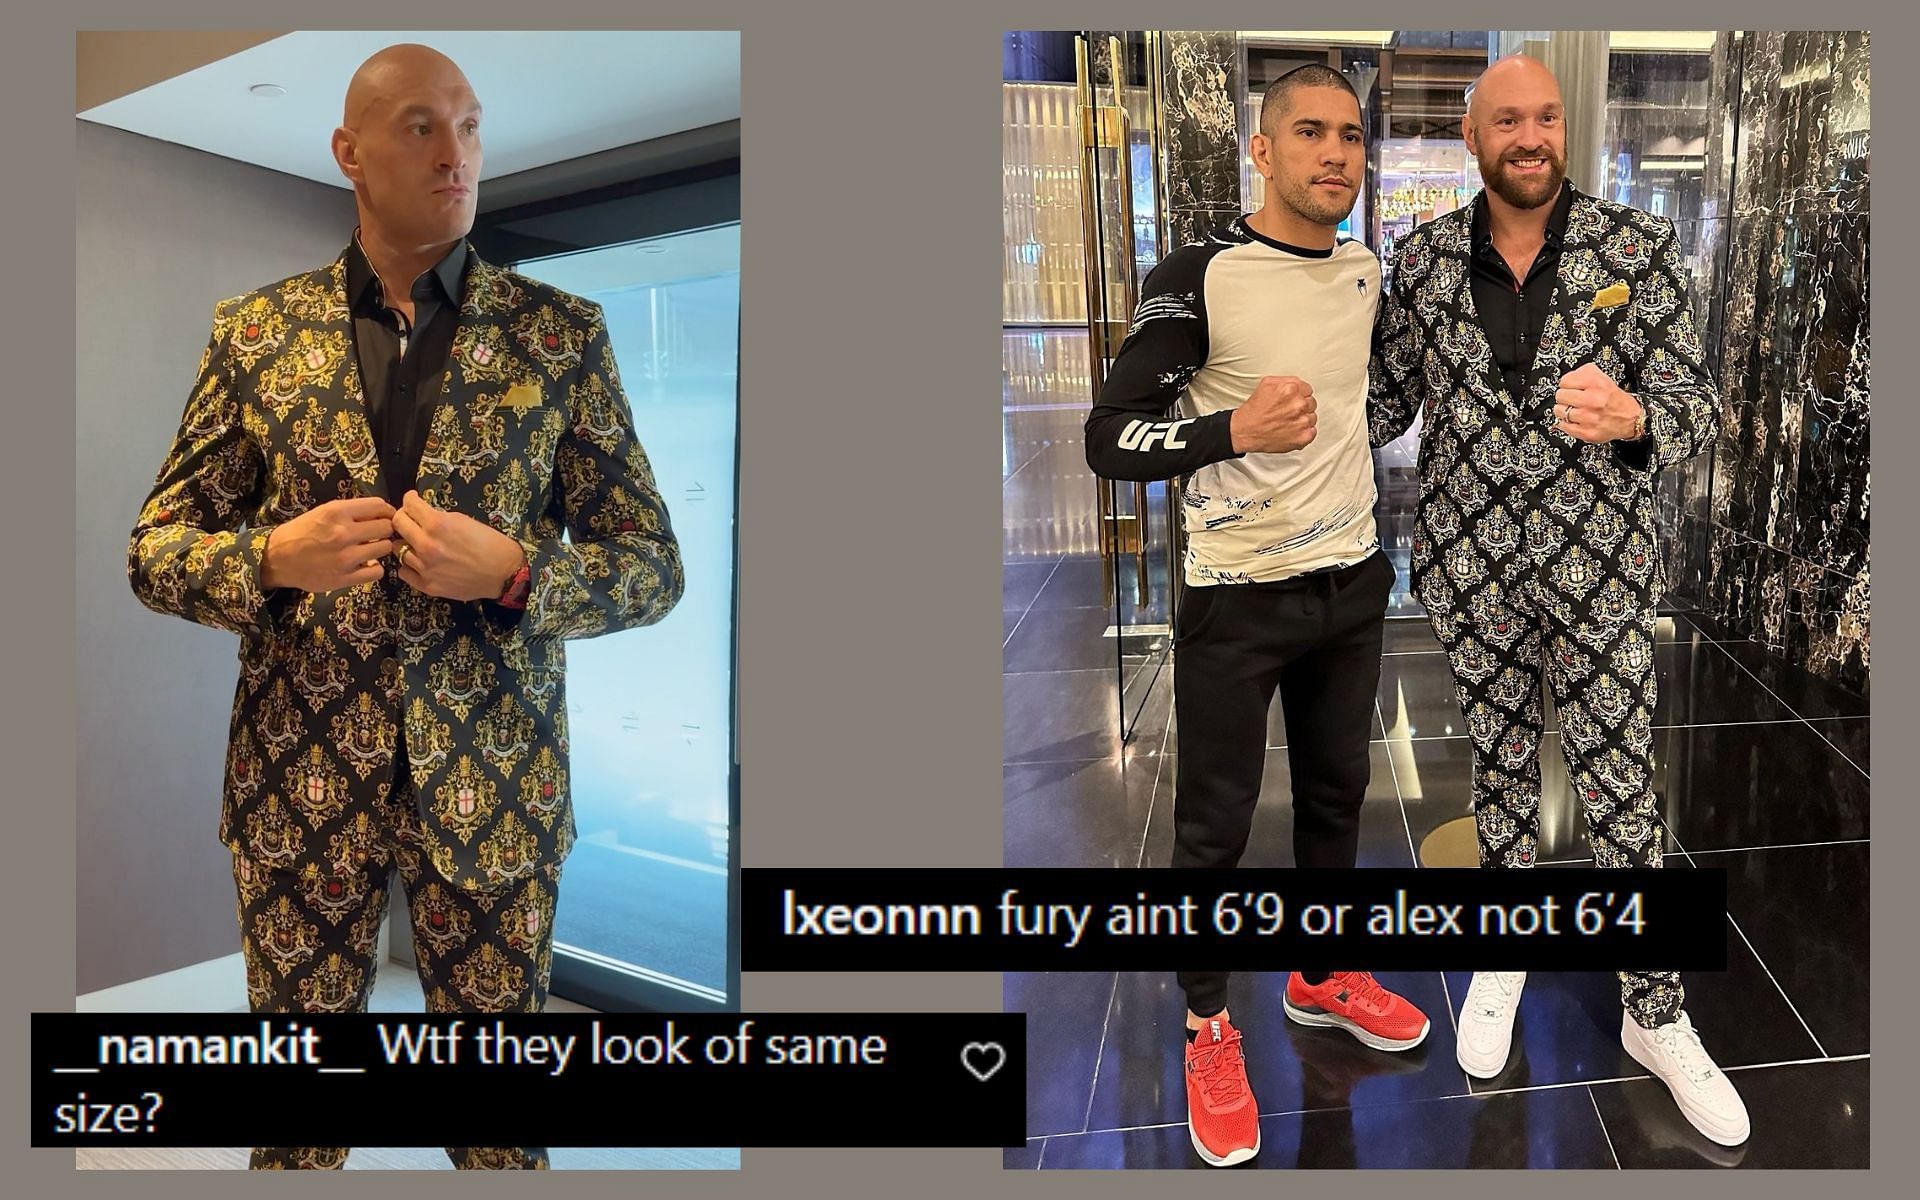 Fans call out Tyson Fury for his height as he poses alongside Alex Pereira